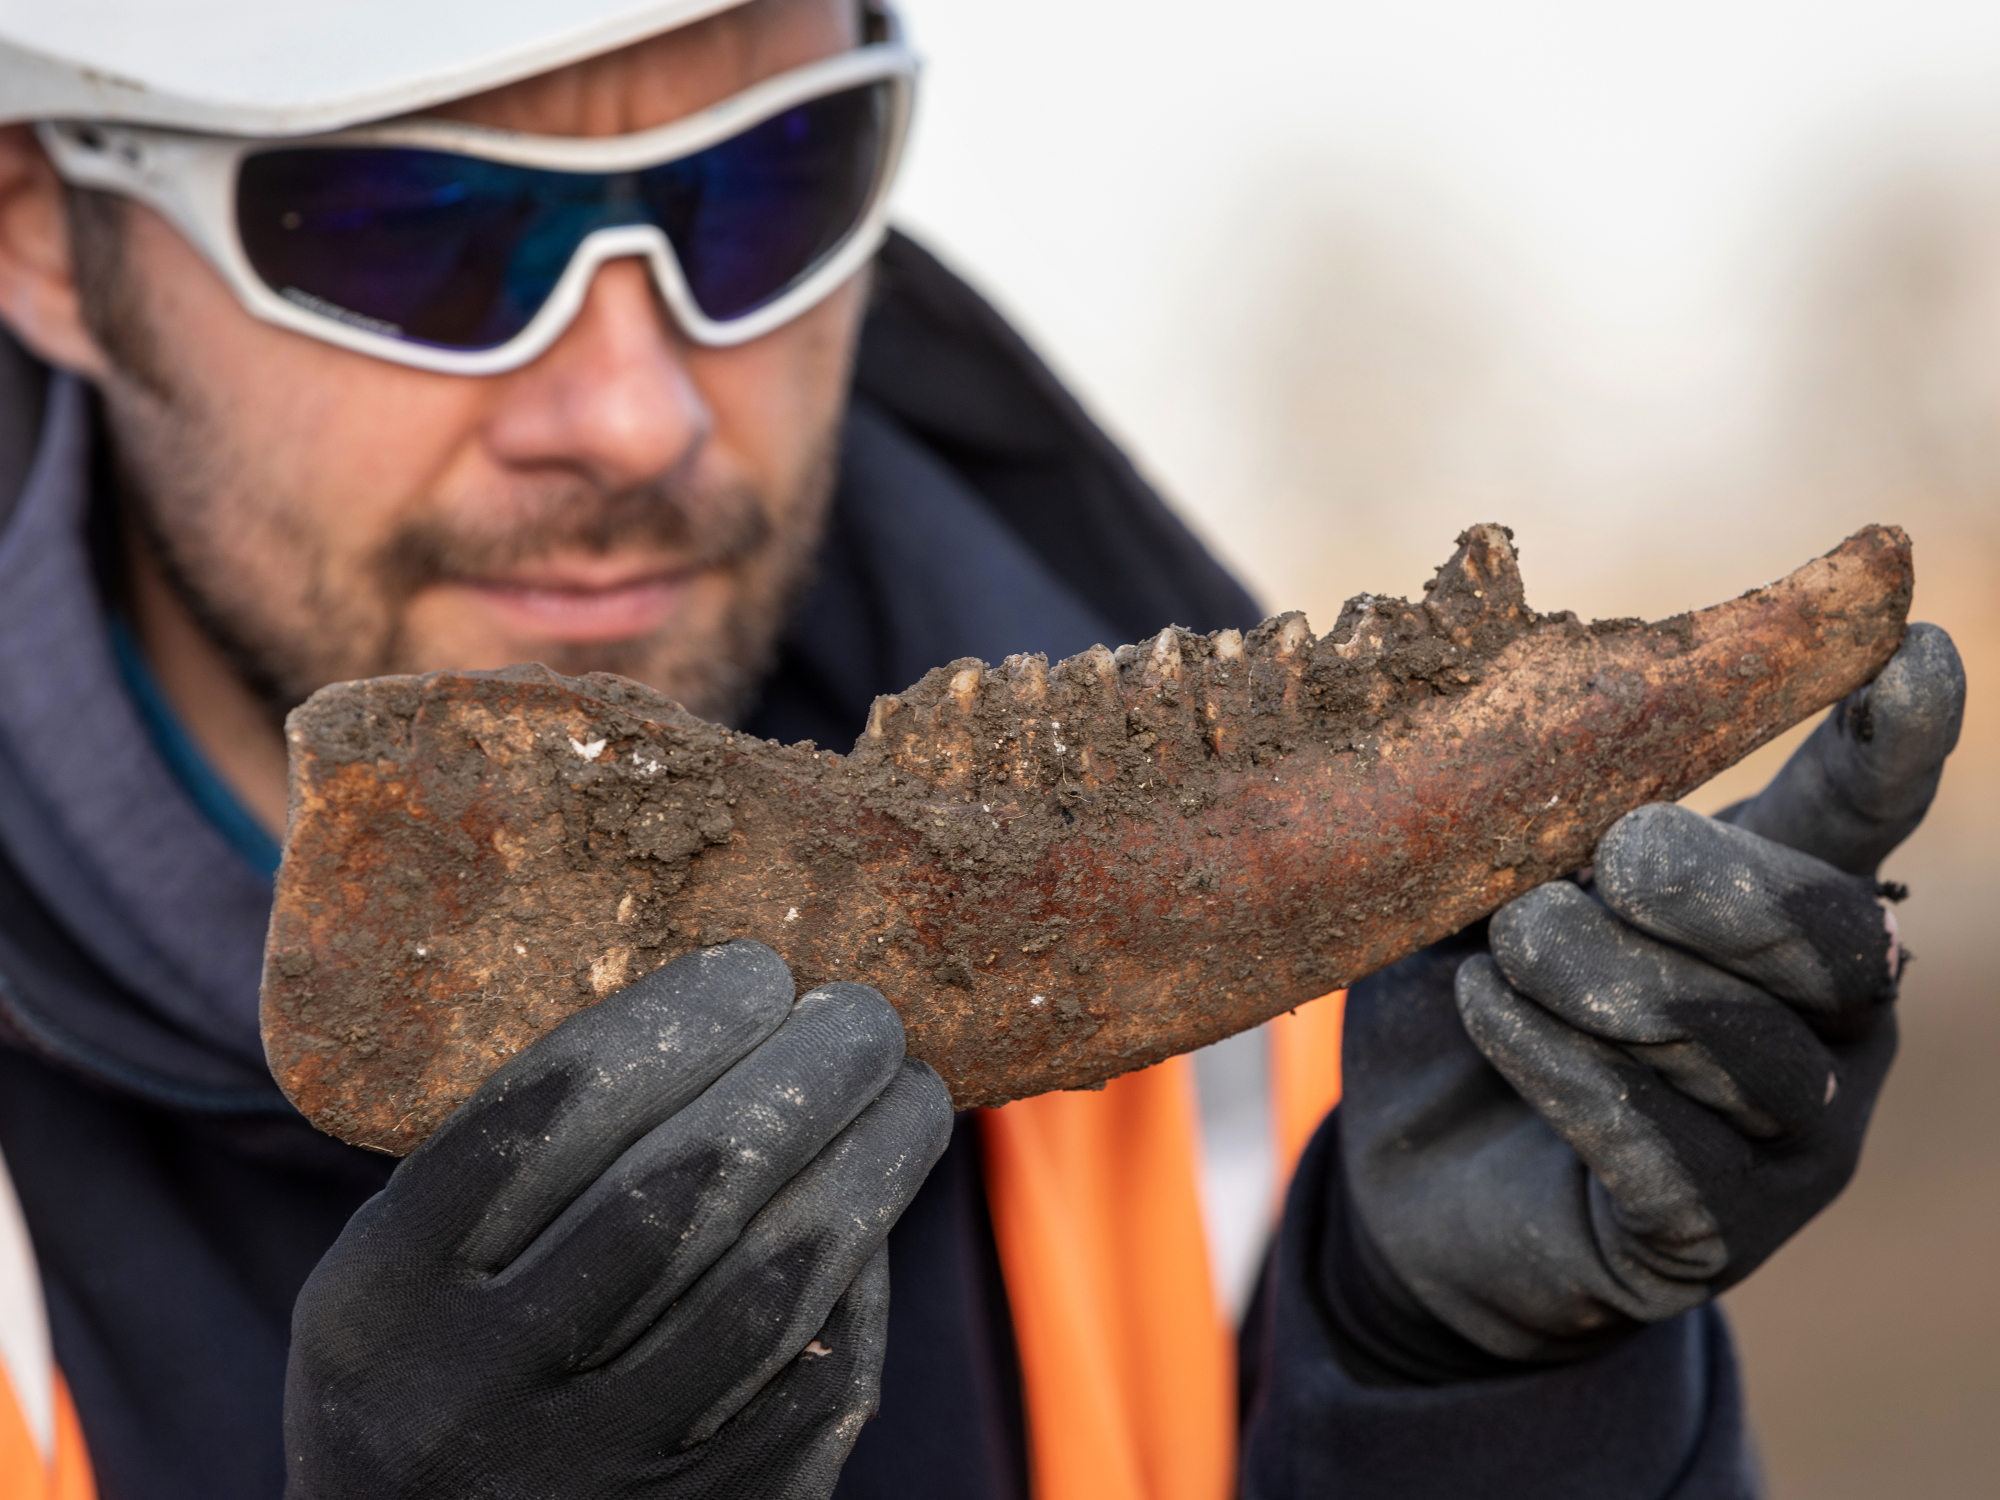 An archaeologist wearing gloves holds up the muddy jaw bone of a cow.